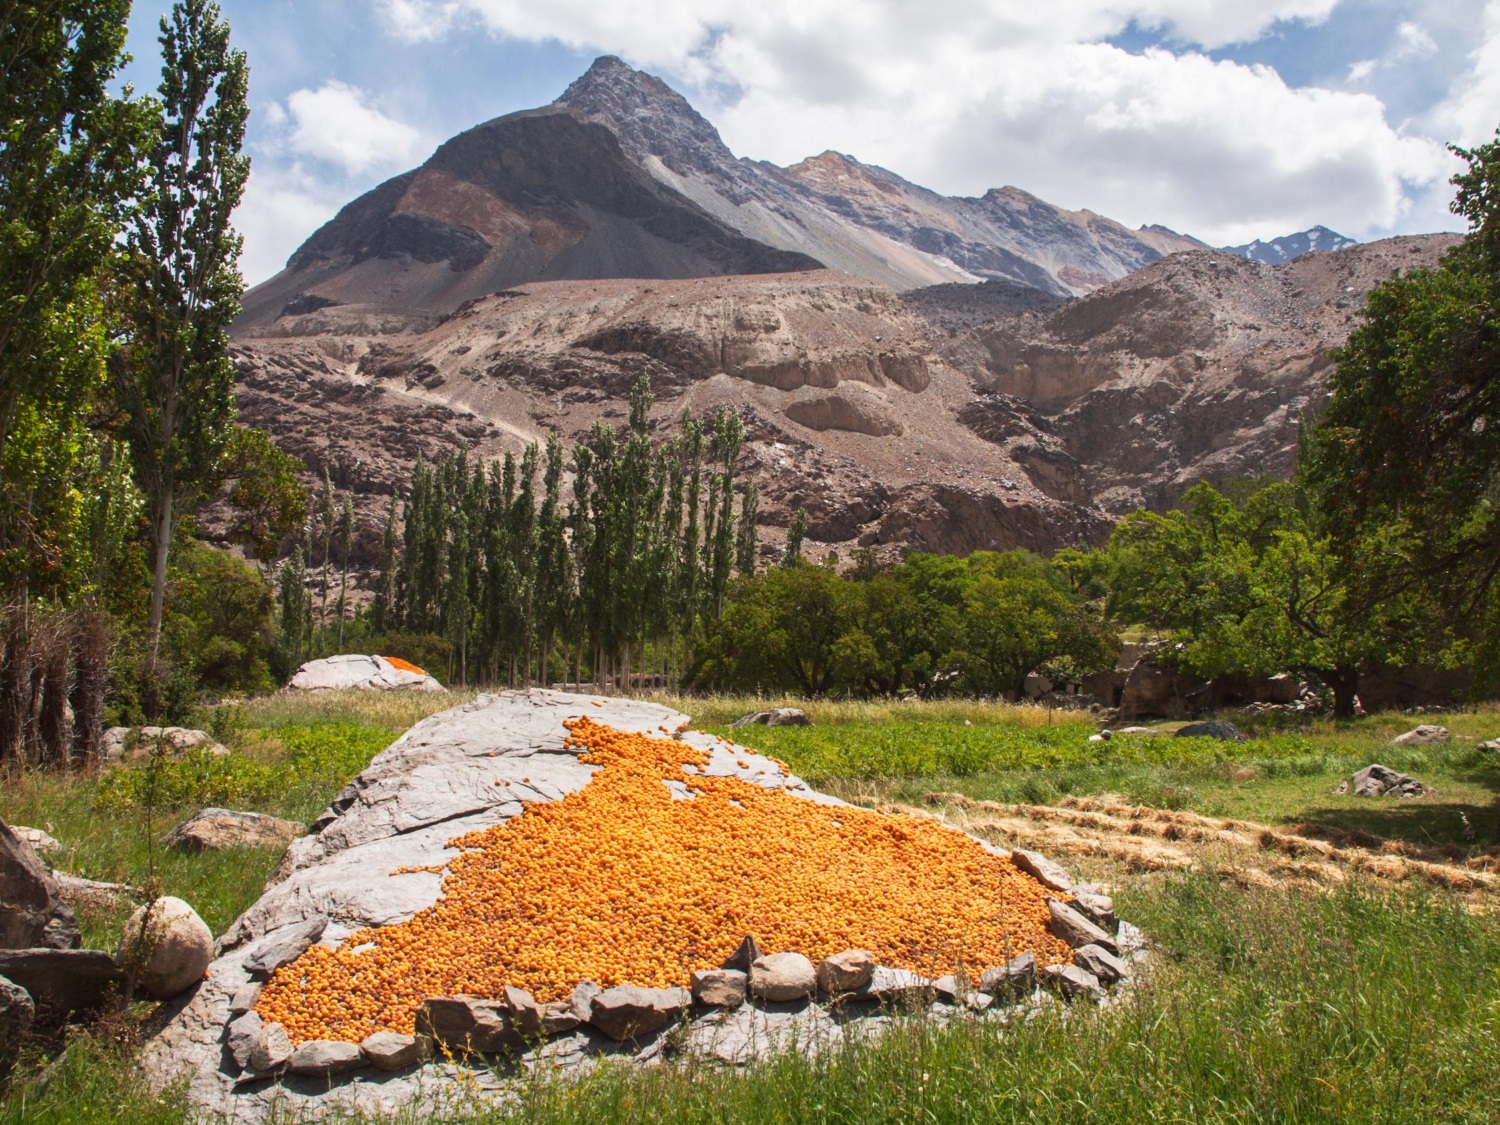 Heap of apricots drying on a large stone in the Pamirs, Tajikistan